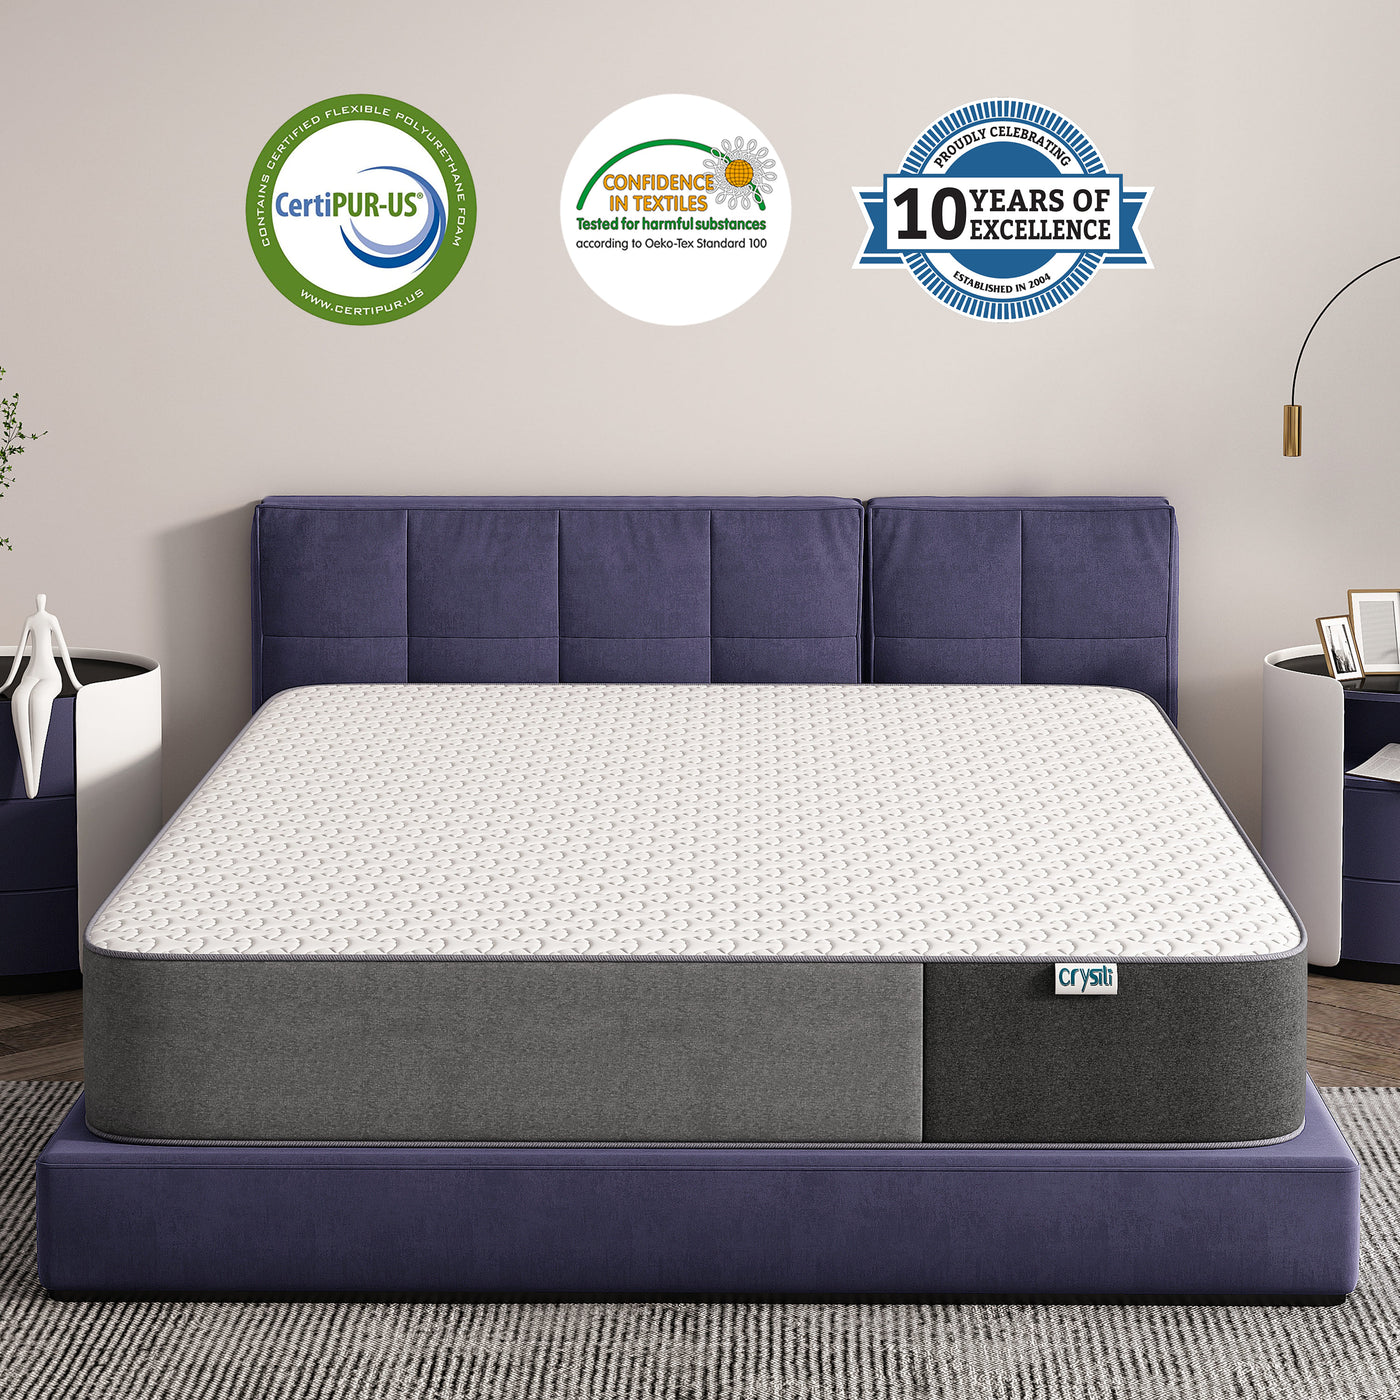 Crystli DC Collection| 6 inch Memory Foam Mattress with CertiPUR-US Certified (CA)